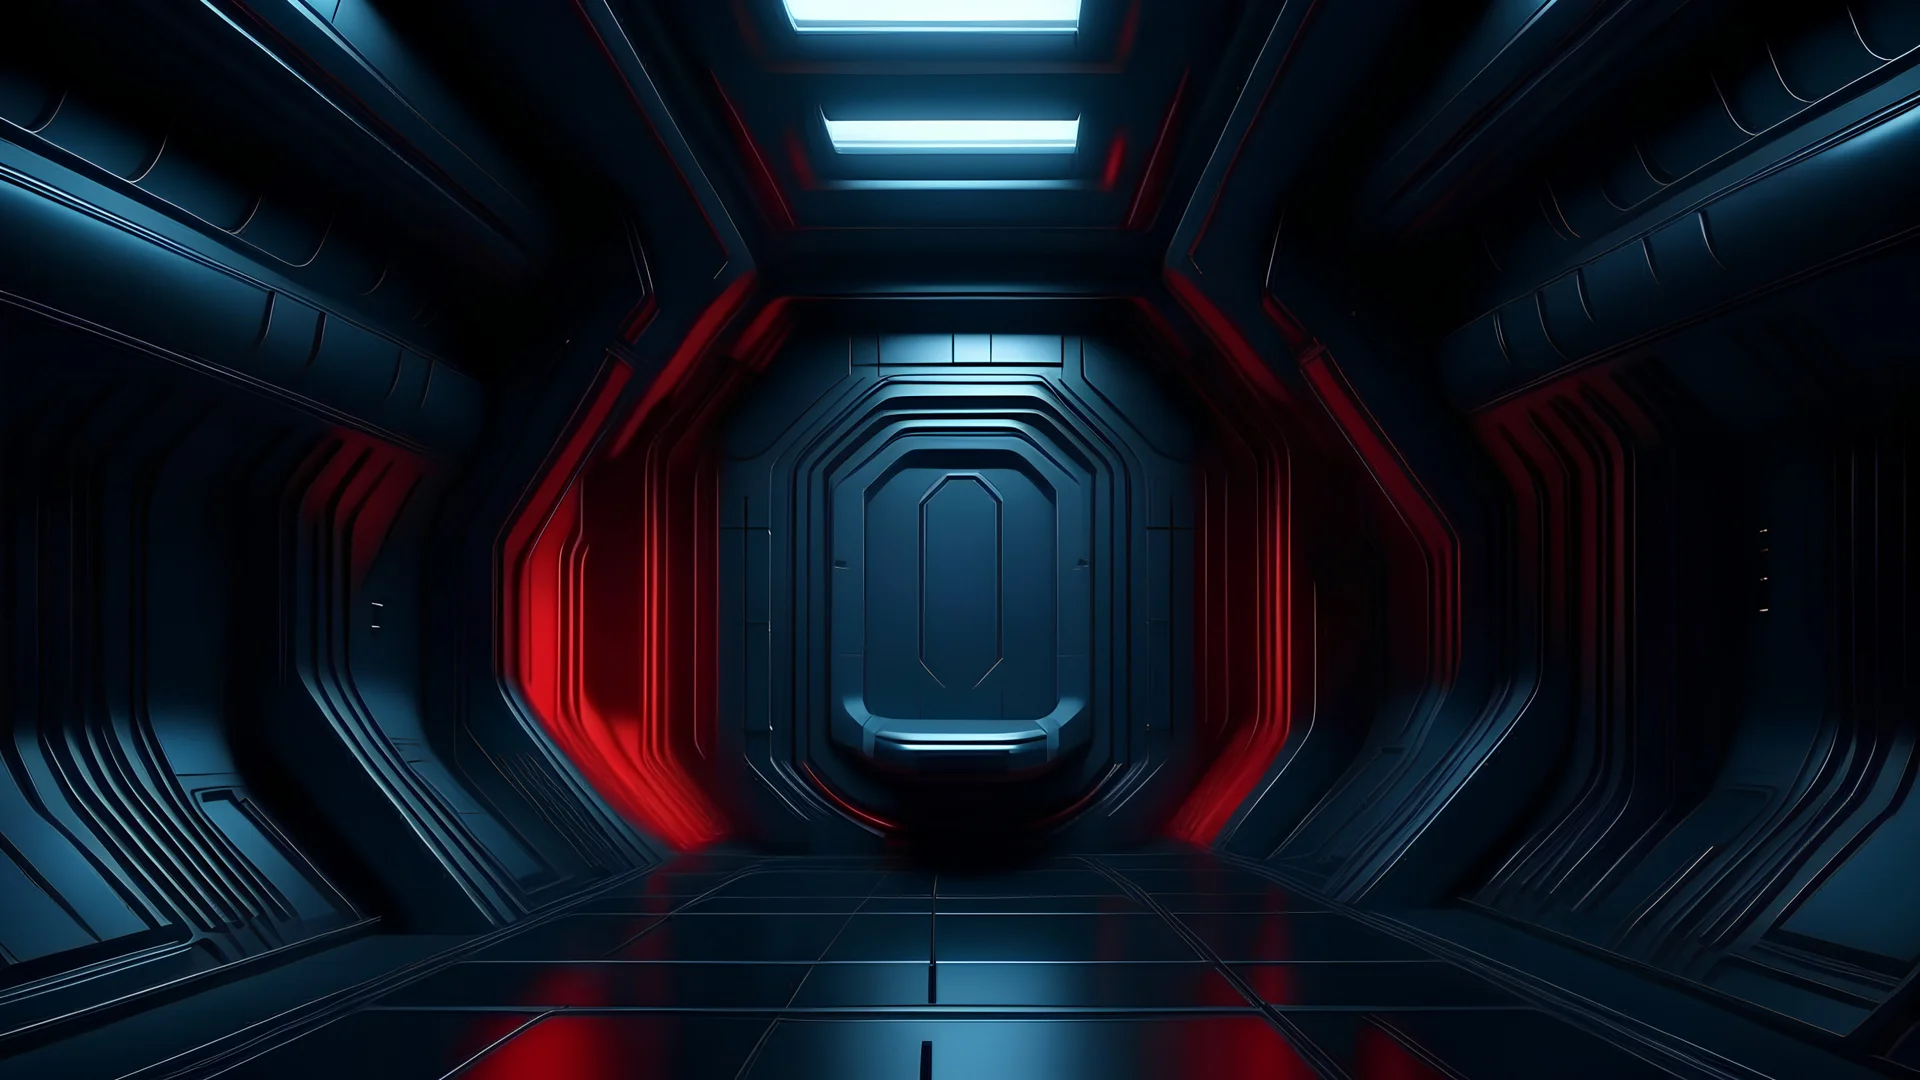 3d, grey,blue,dark mode, wallpaper,,background,design,paint,futuristic, space ship interior, technology, thin red streak, thick matte lines with soft edges, minimalistic